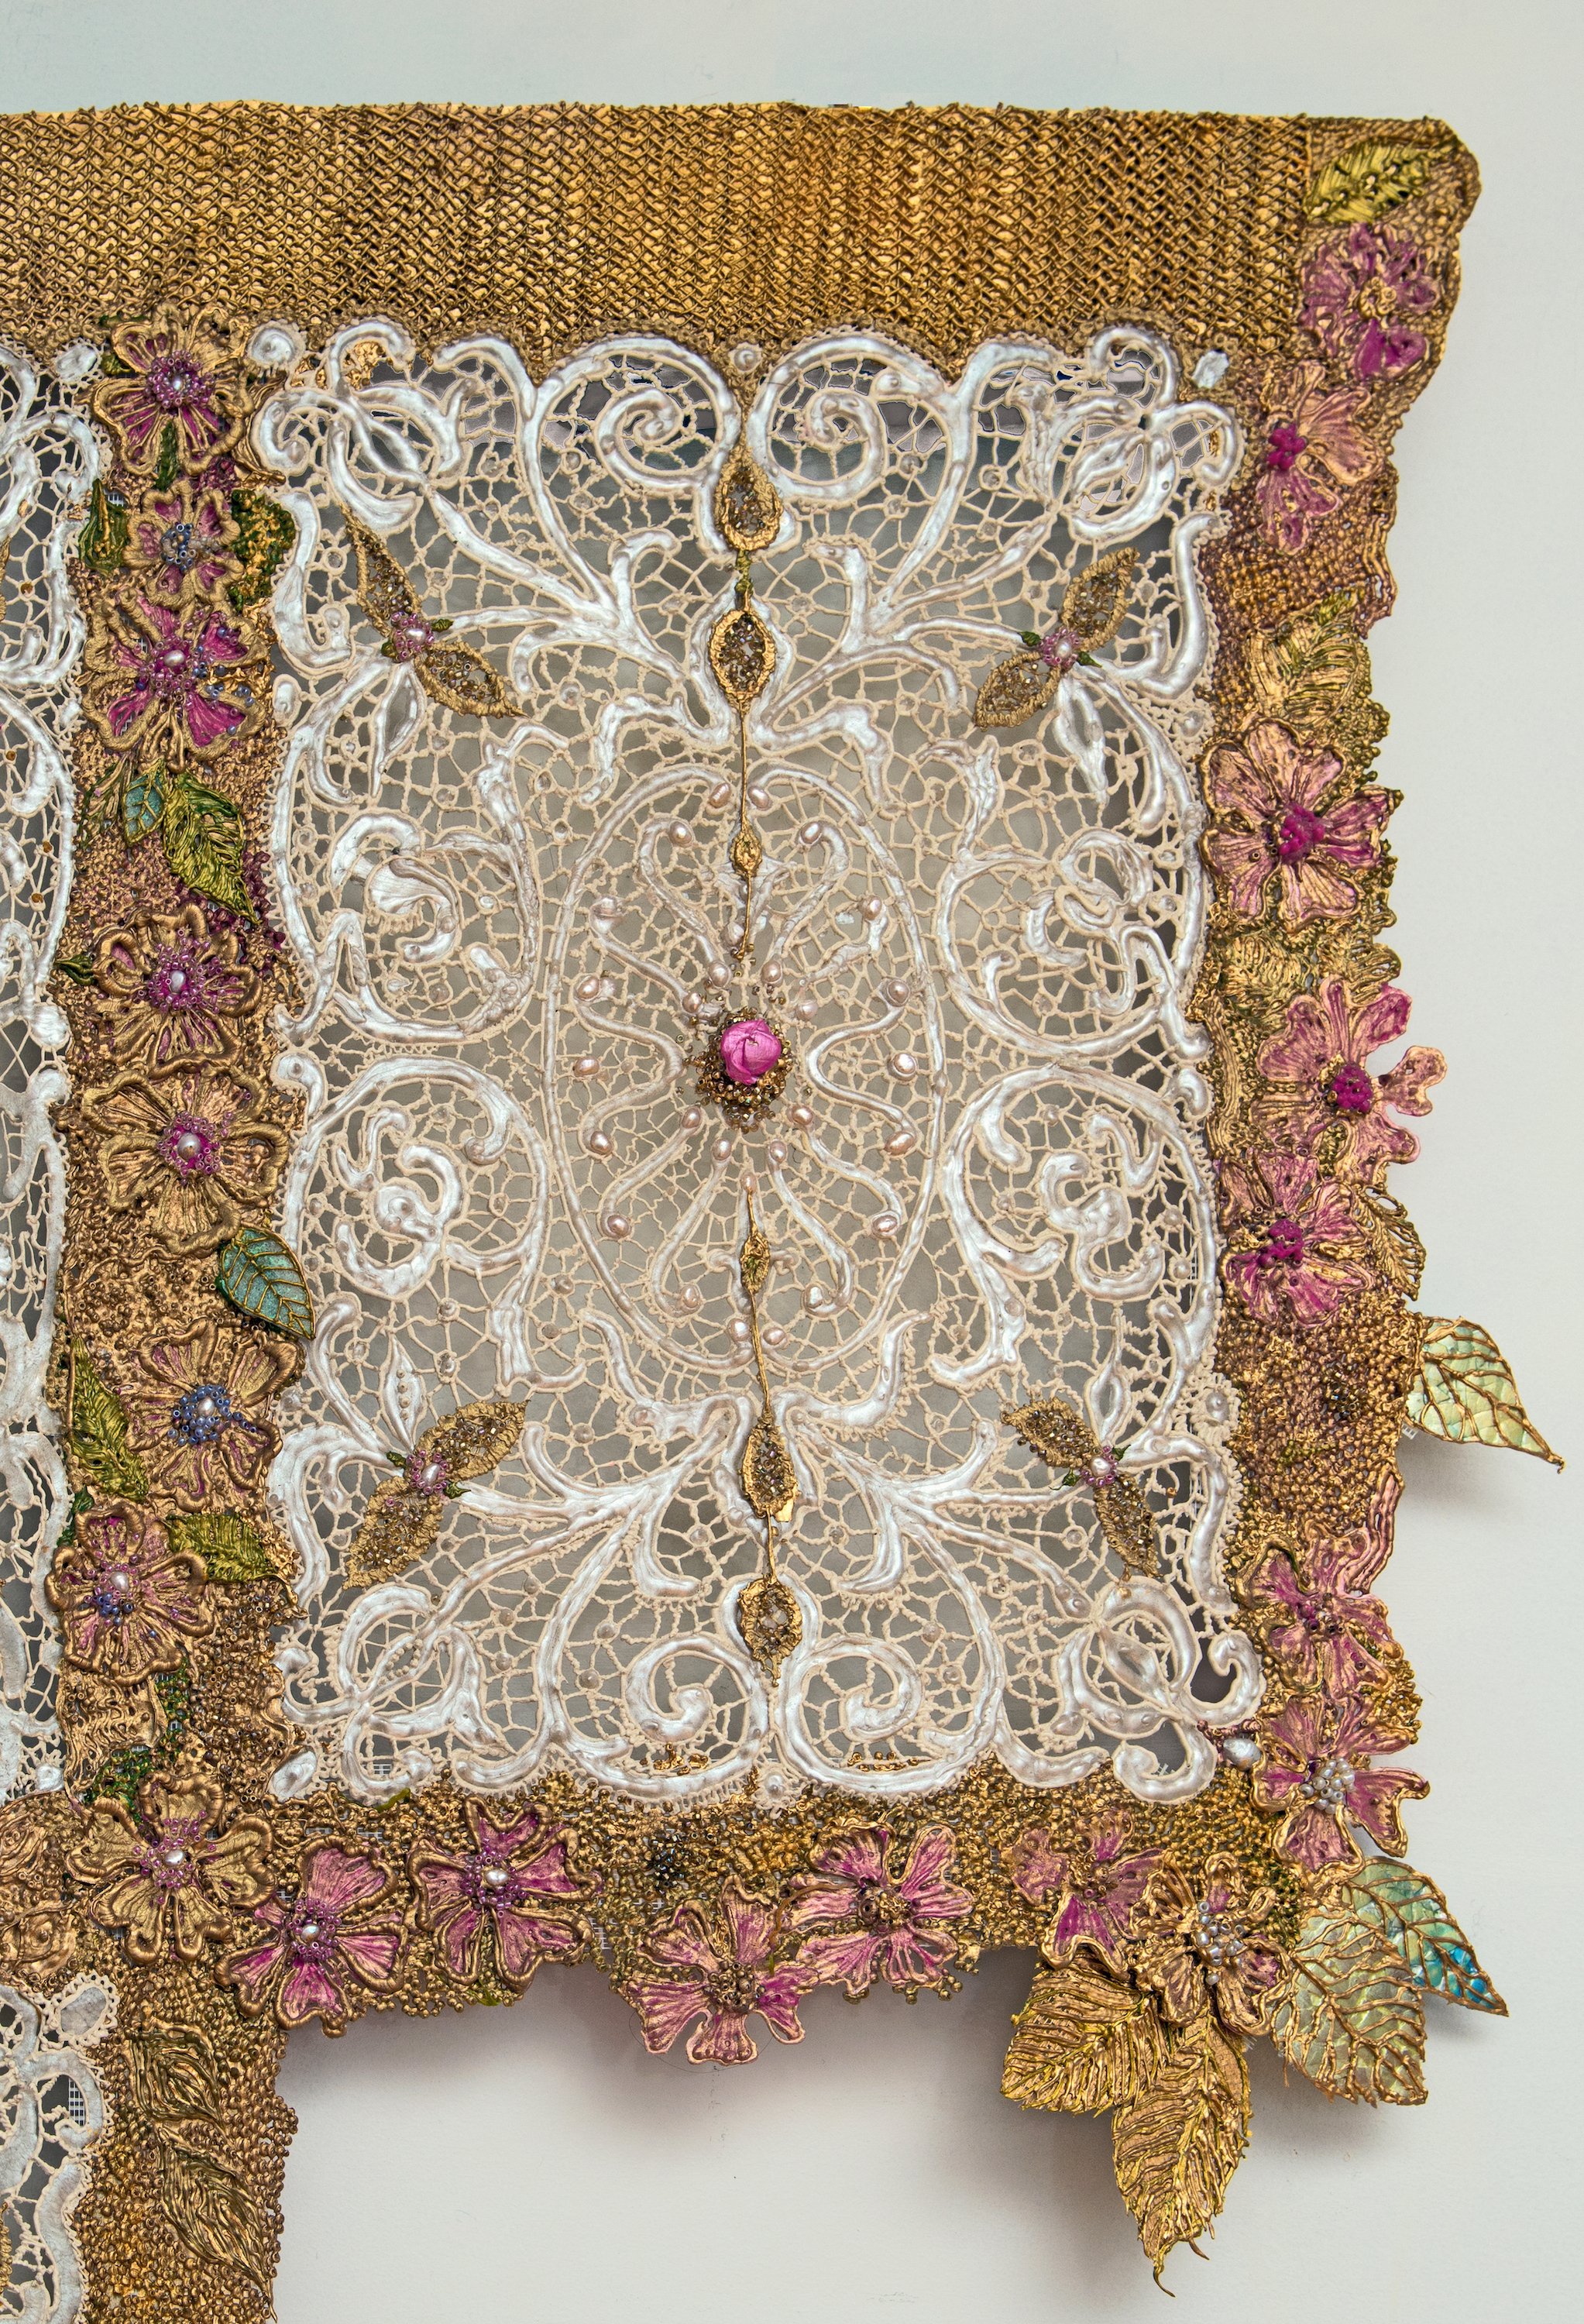 Detail of double panel garment of acrylic paint lace, flowers, and leaves in white, gold, pink, and green.